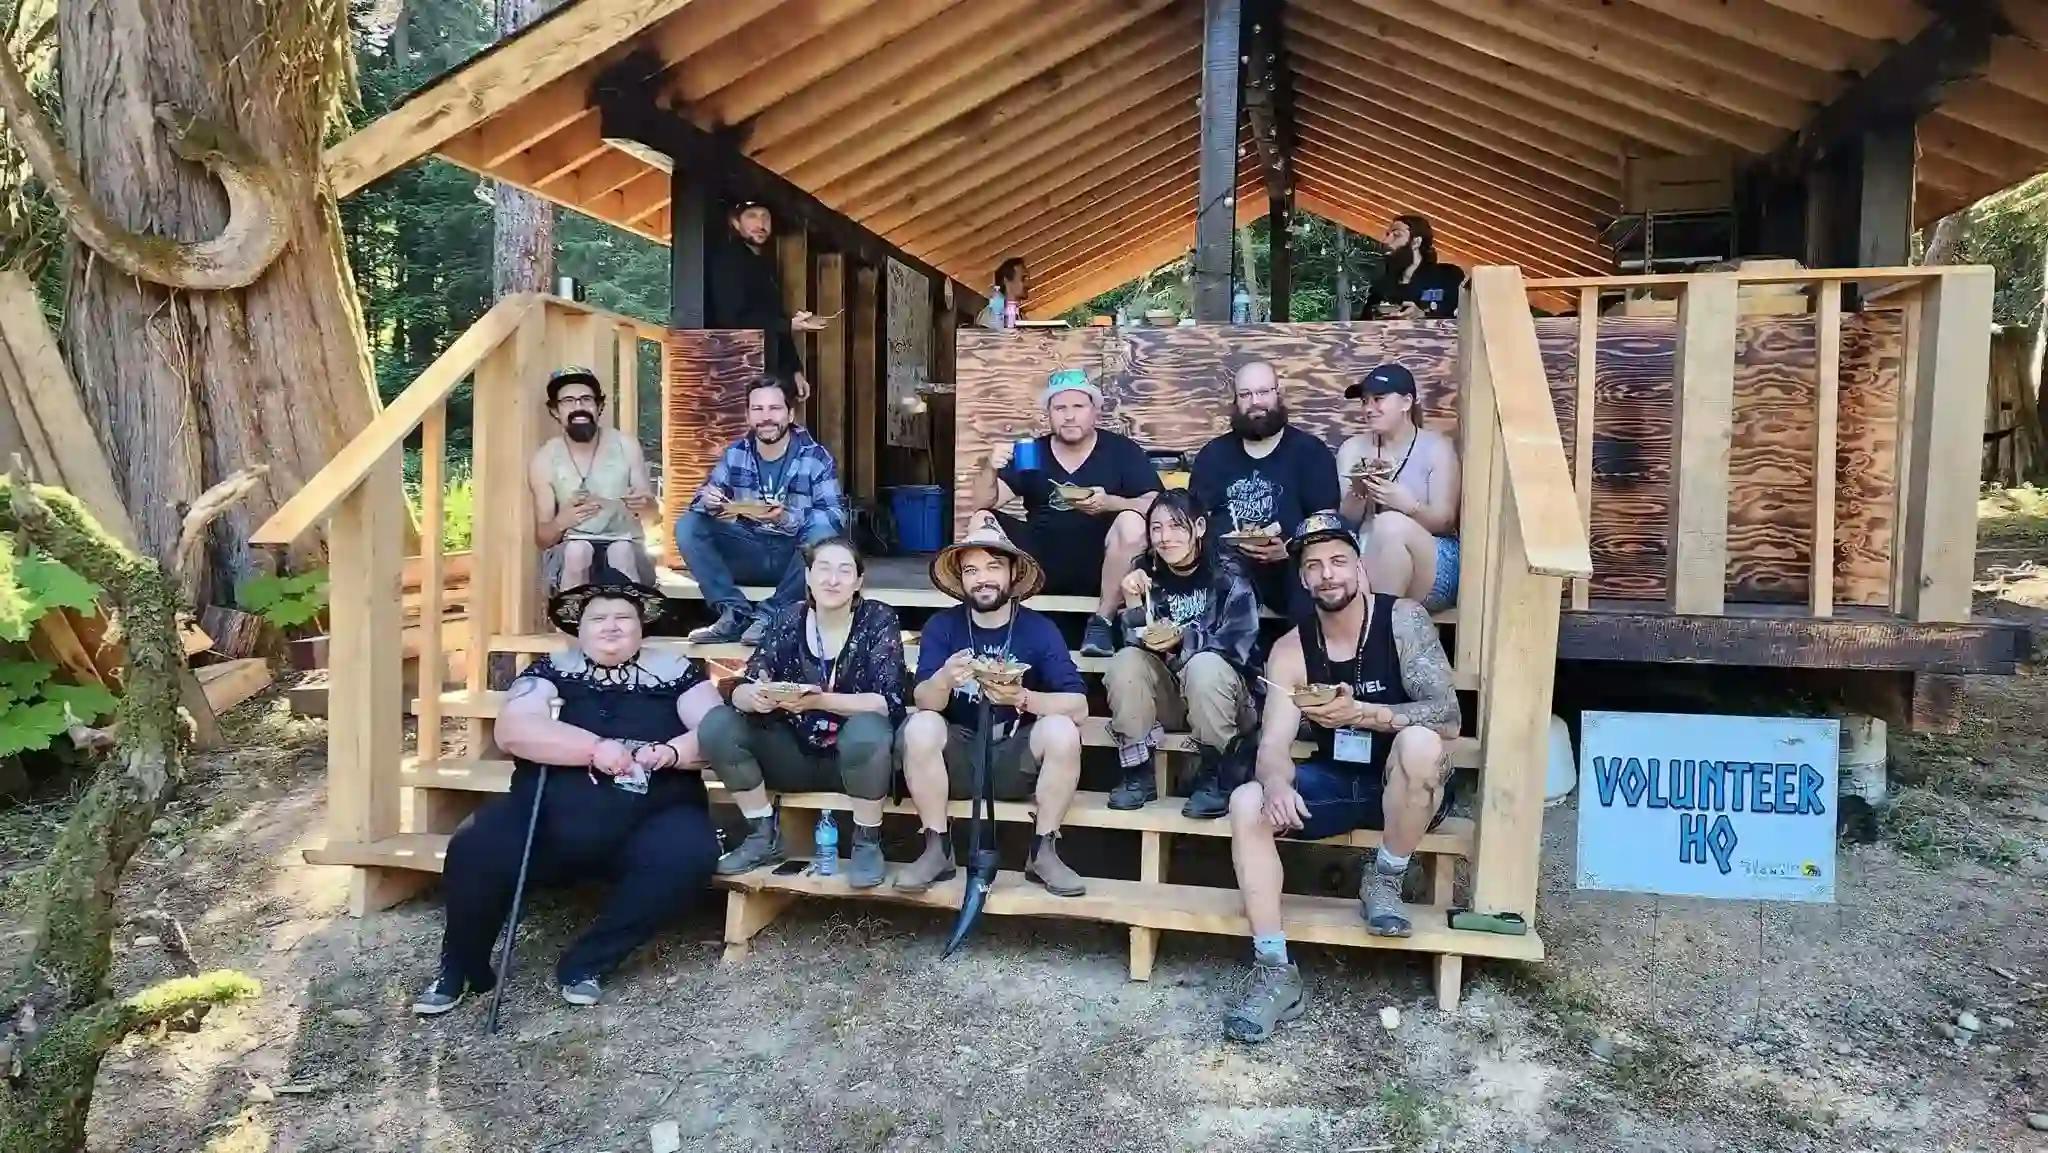 A group of smiling volunteers from Valhallafest 2023 gathered on steps of a wooden cabin in a forest setting.